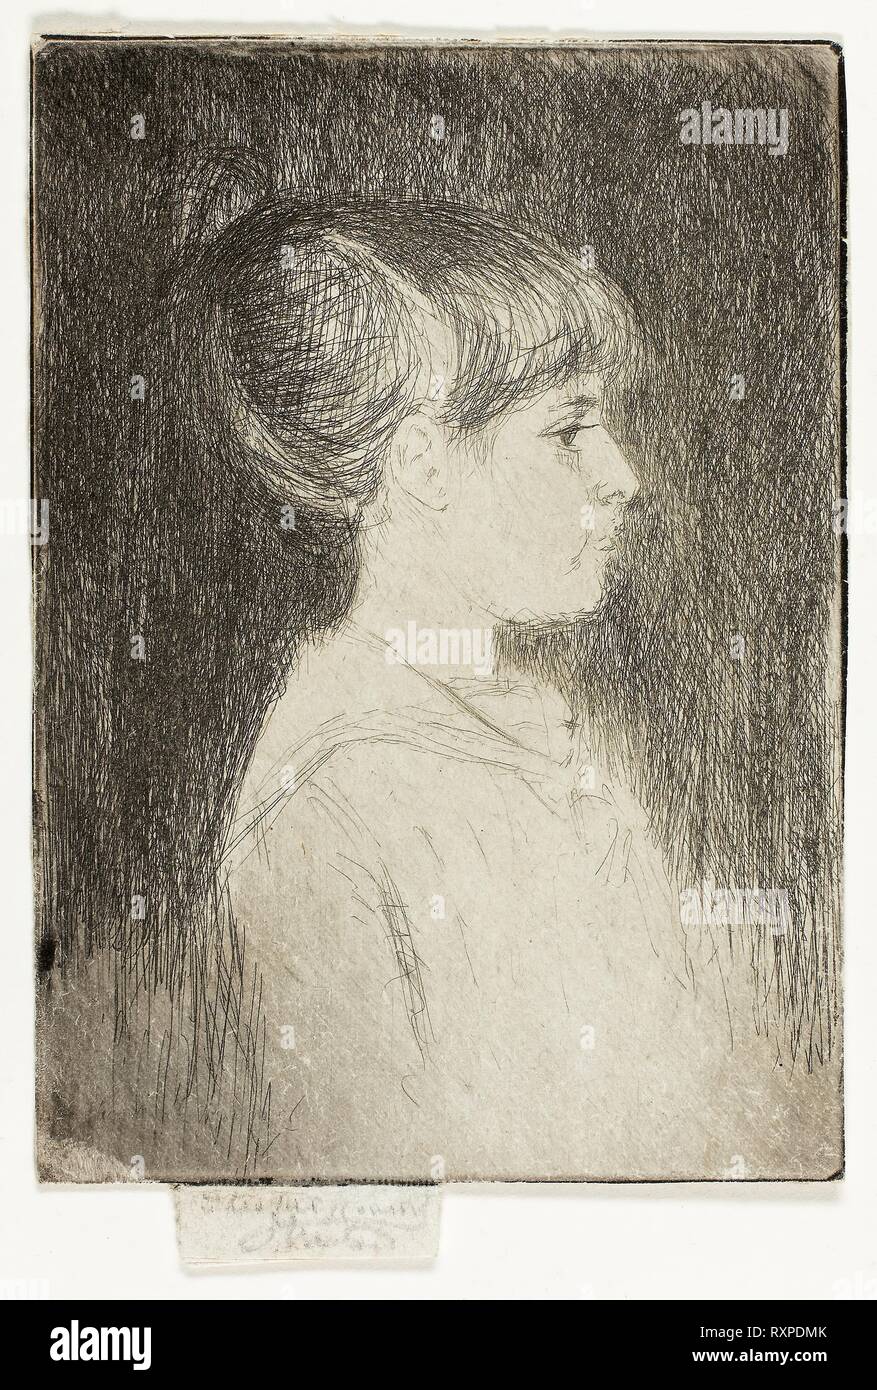 Jeanette, June 1887. Theodore Roussel; French, worked in England, 1847-1926. Date: 1887. Dimensions: 89 × 63 mm (image/plate); 95 × 63 mm (sheet). Etching in black on ivory wove paper. Origin: England. Museum: The Chicago Art Institute. Stock Photo